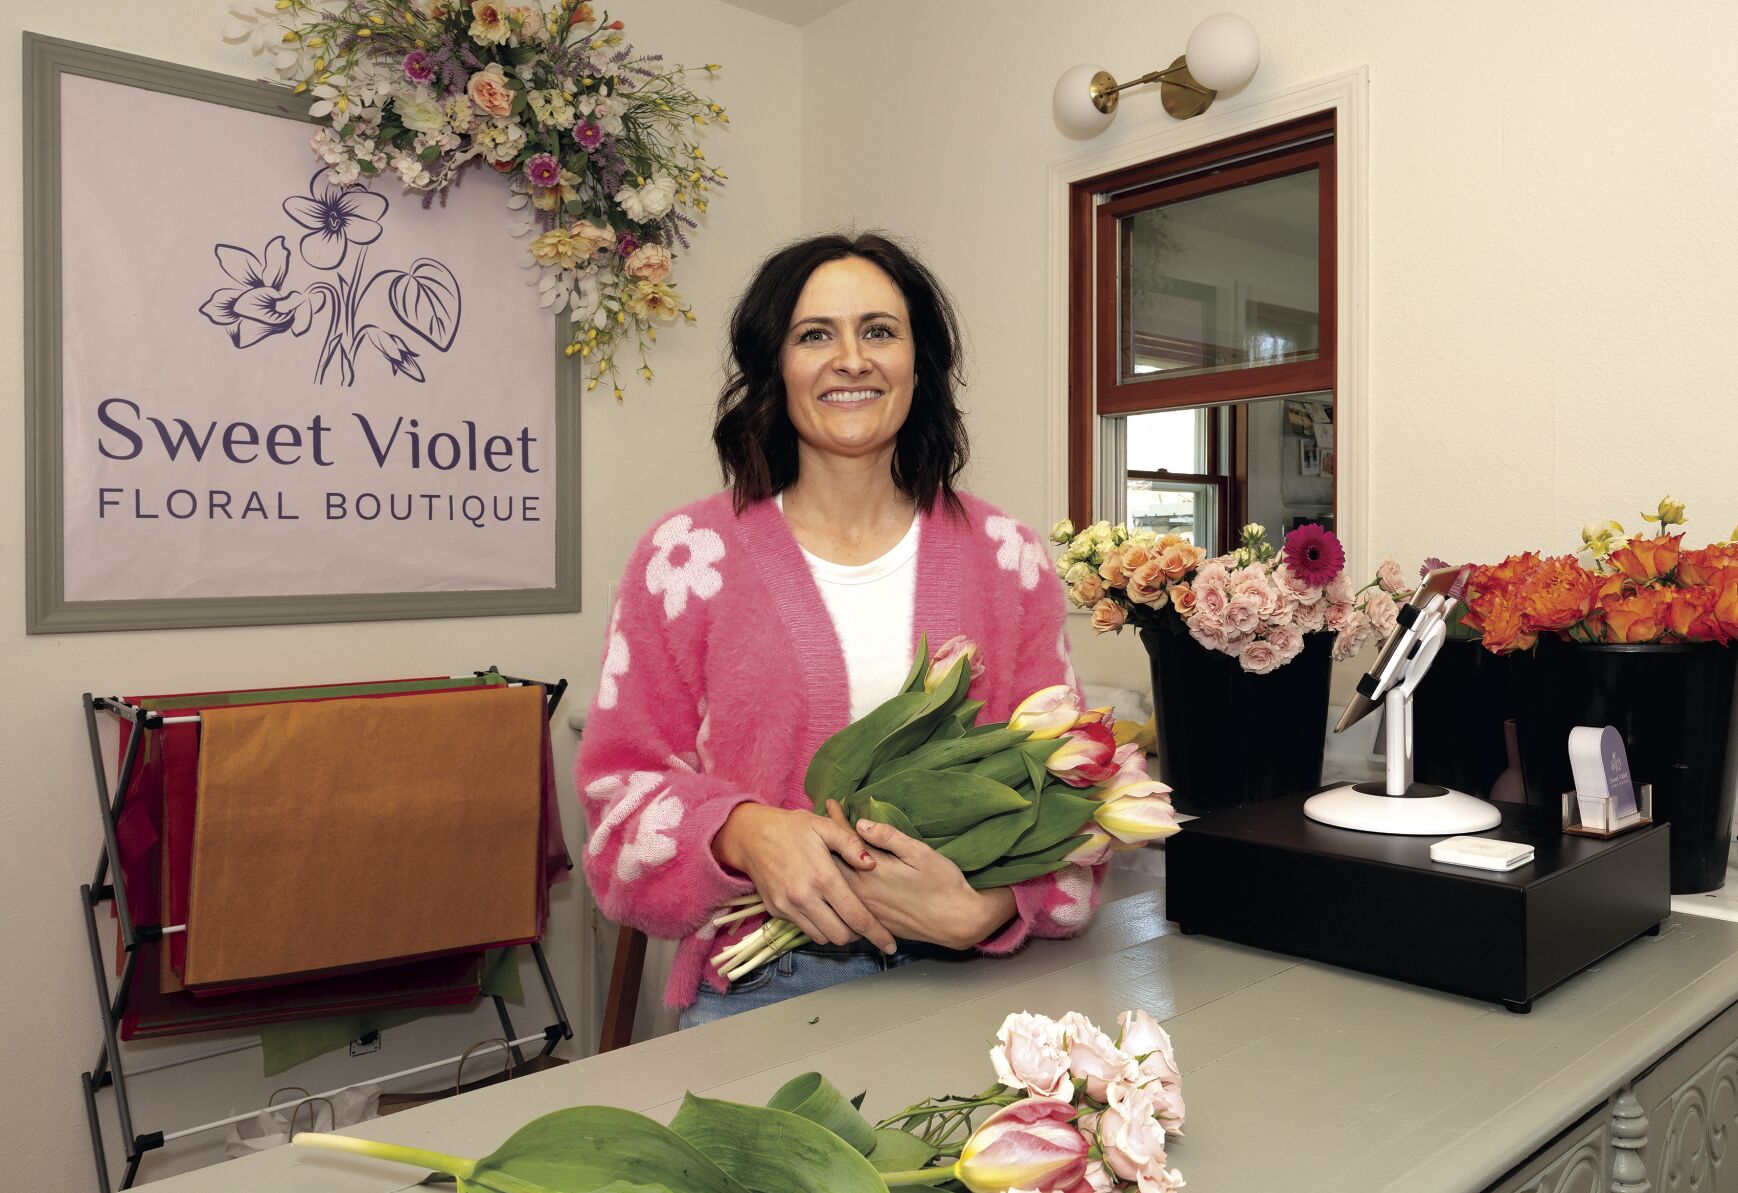 Owner Ellen Pinnola stands behind the counter at Sweet Violet Floral Boutique at 140 S. Water St. in Platteville, Wis., on Friday.    PHOTO CREDIT: Stephen Gassman